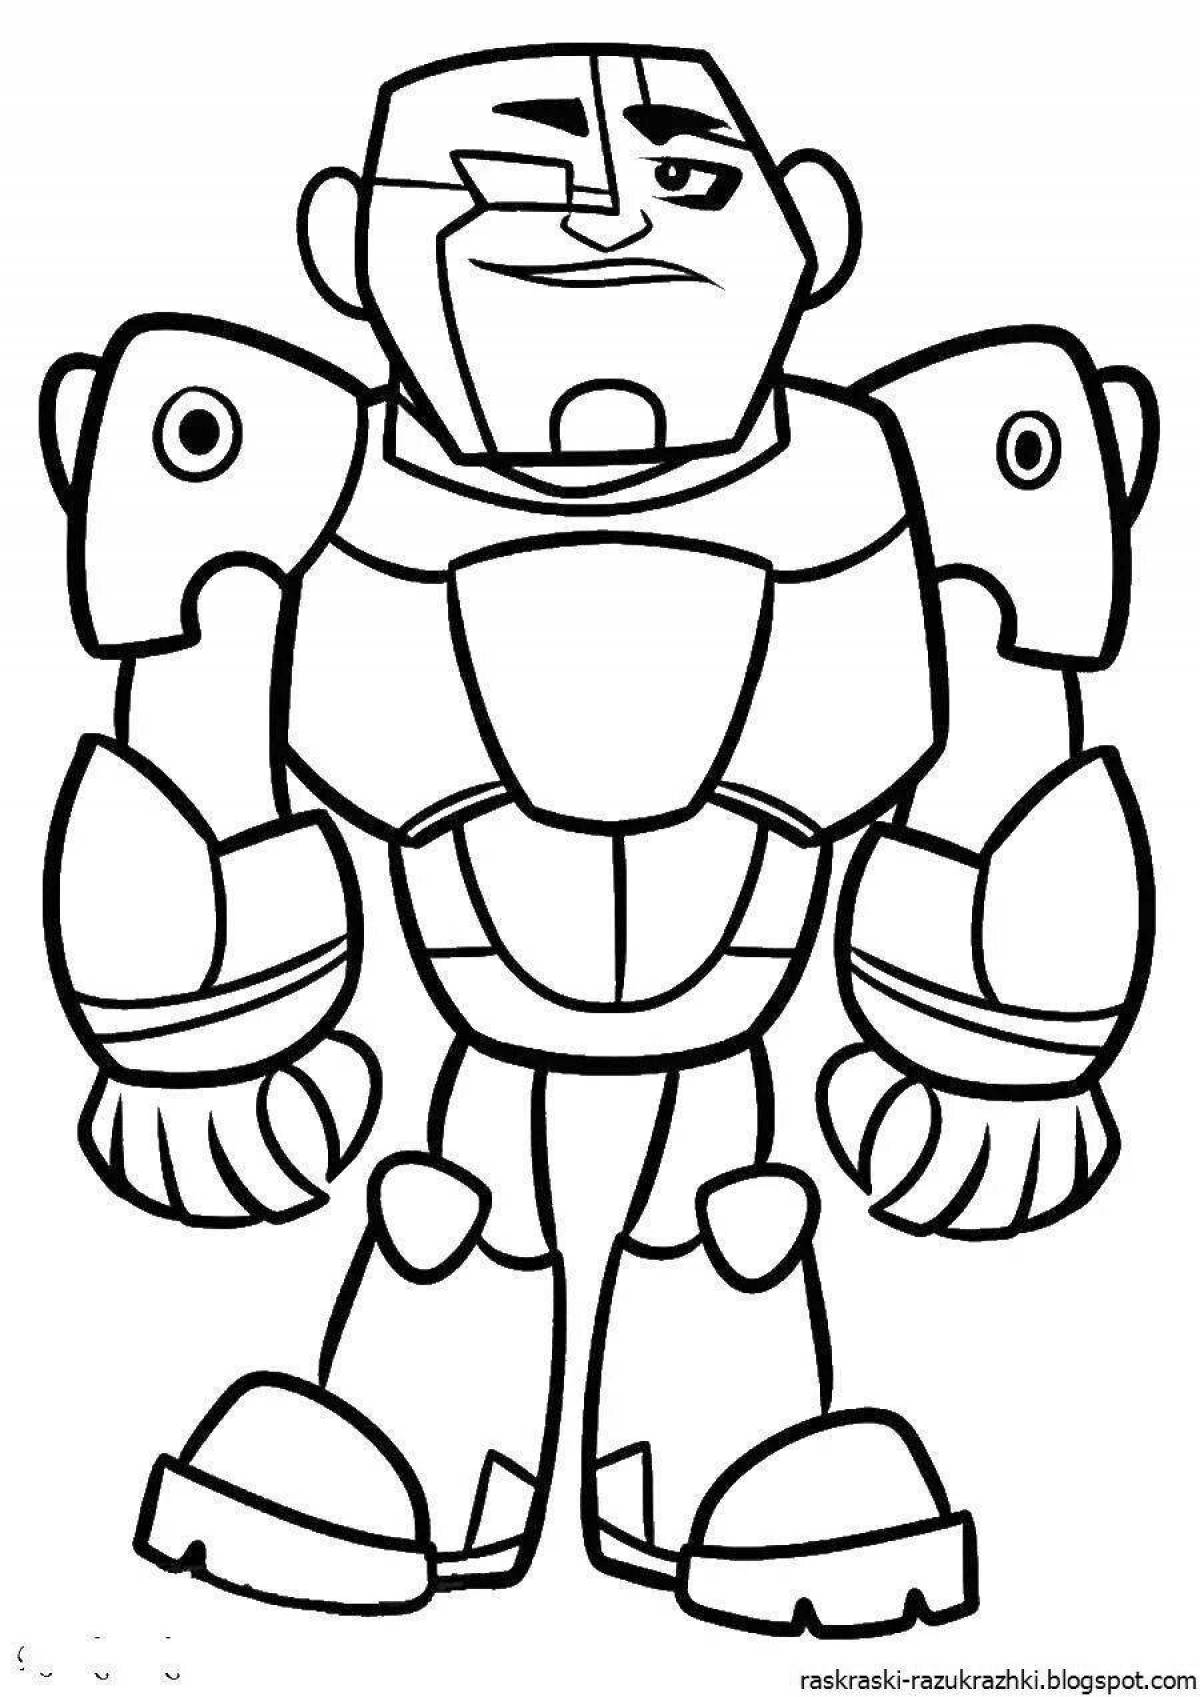 Colorful robot coloring book for 5 year olds